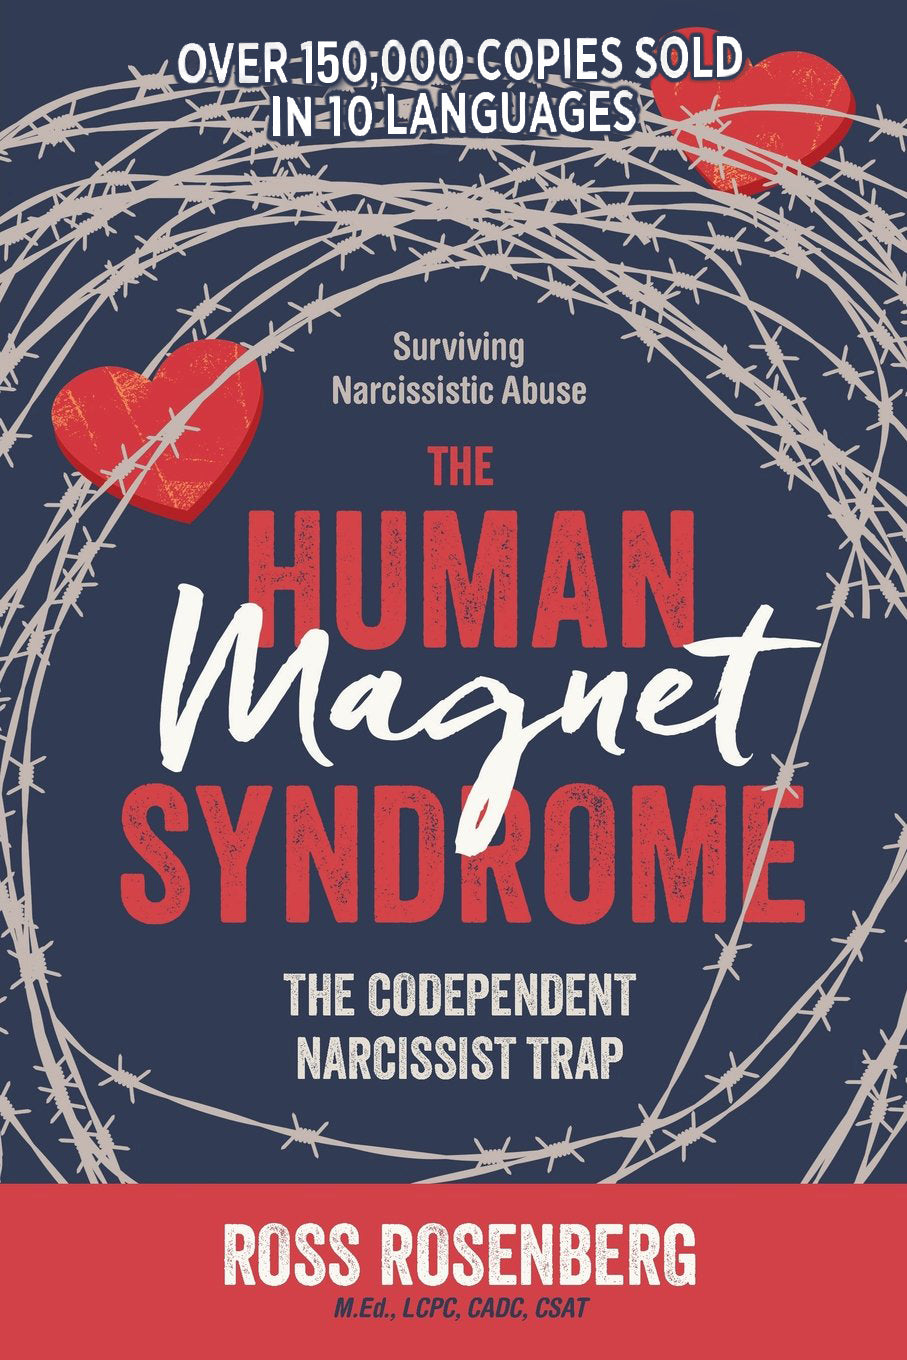 The Human Magnet Syndrome: The Codependent Narcissist Trap (2018) (Digital)